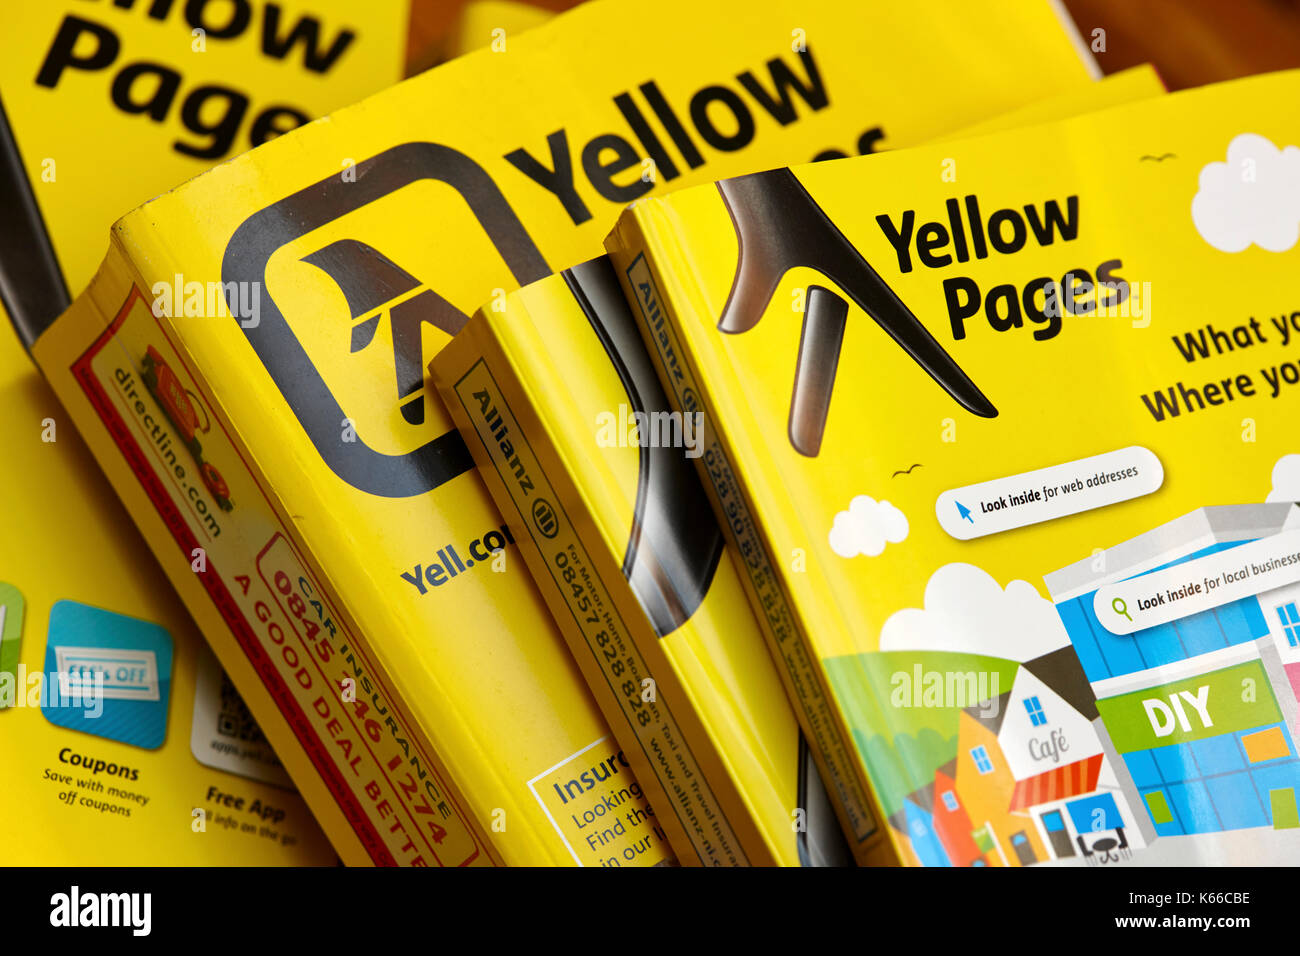 Later Smaller Version Of The Yellow Pages Classified Telephone Directory K66CBE 